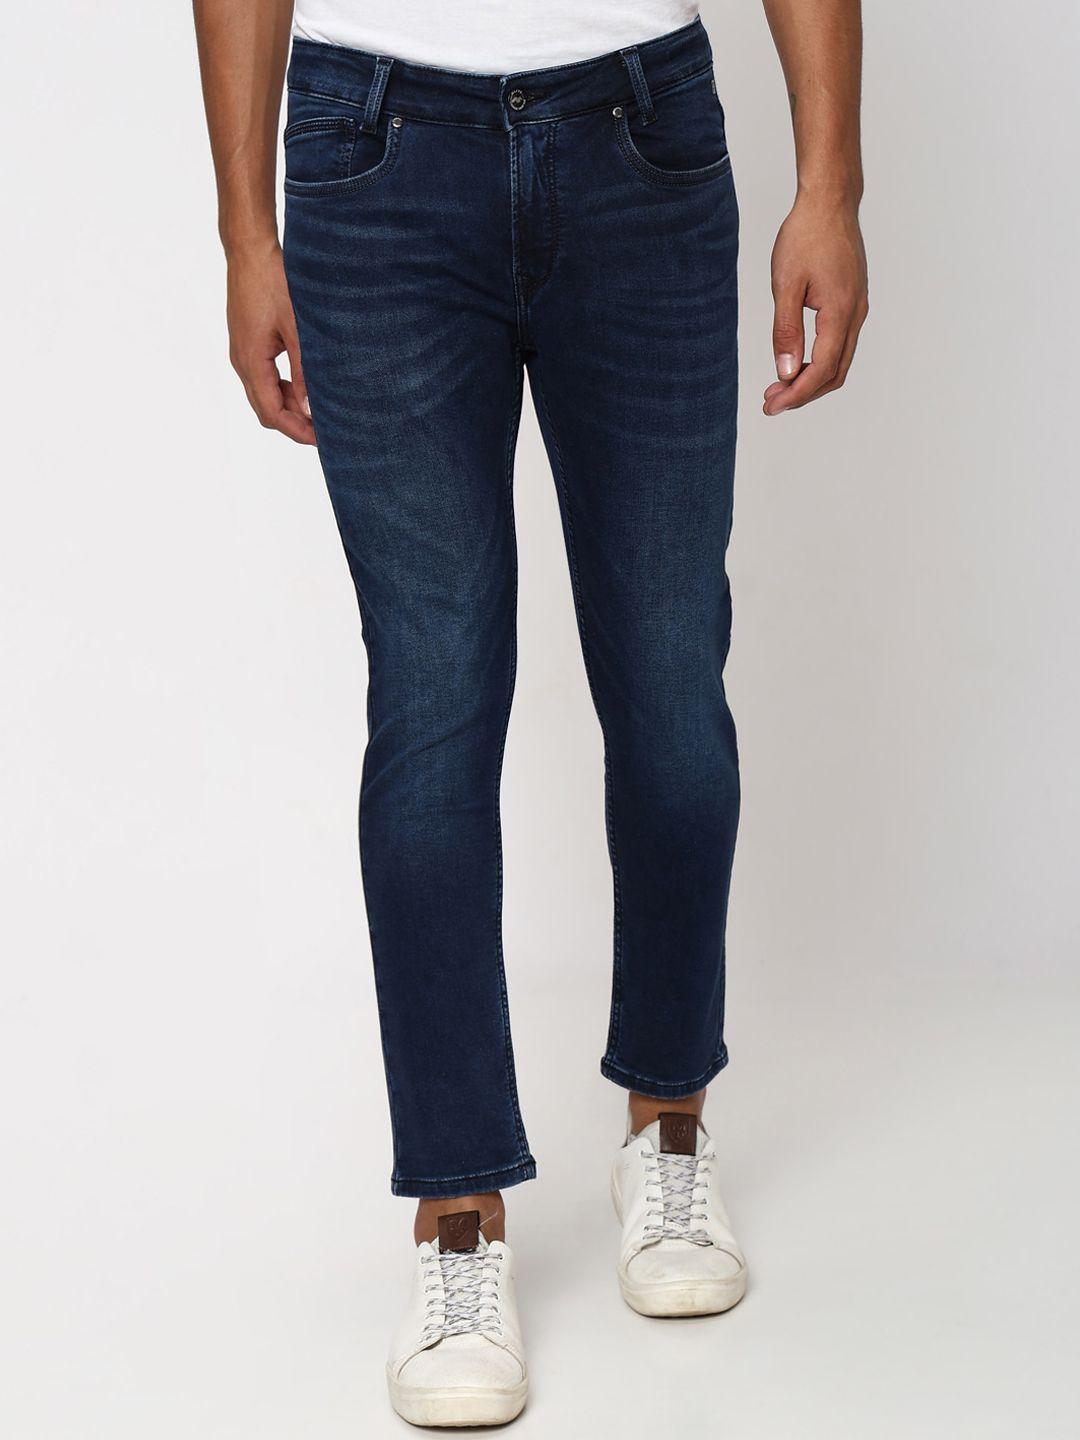 mufti-men-mid-rise-tapered-fit-clean-look-light-fade-stretchable-jeans